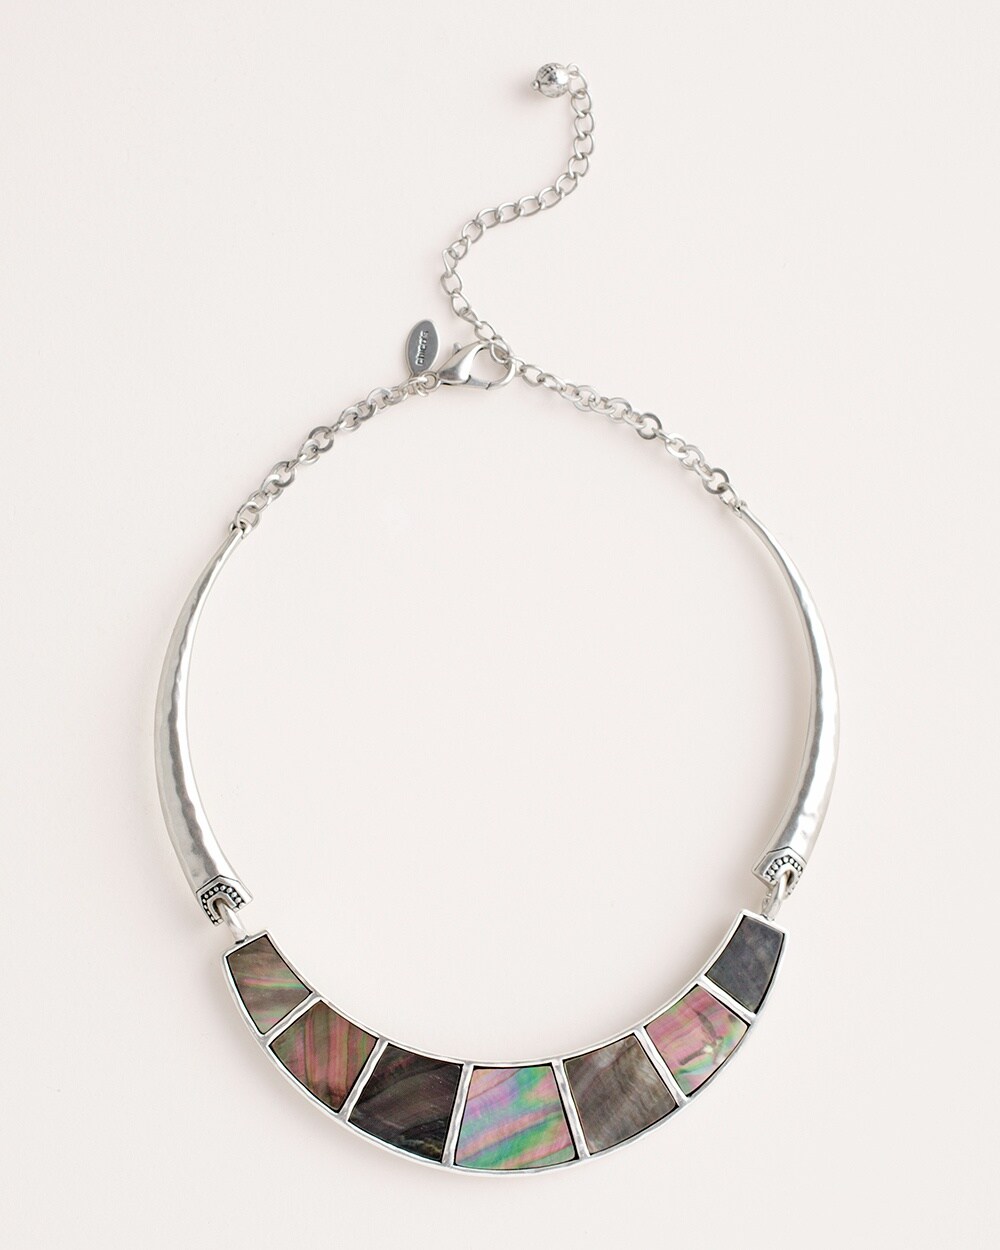 Silvertone Mother-of-Pearl Bib Necklace